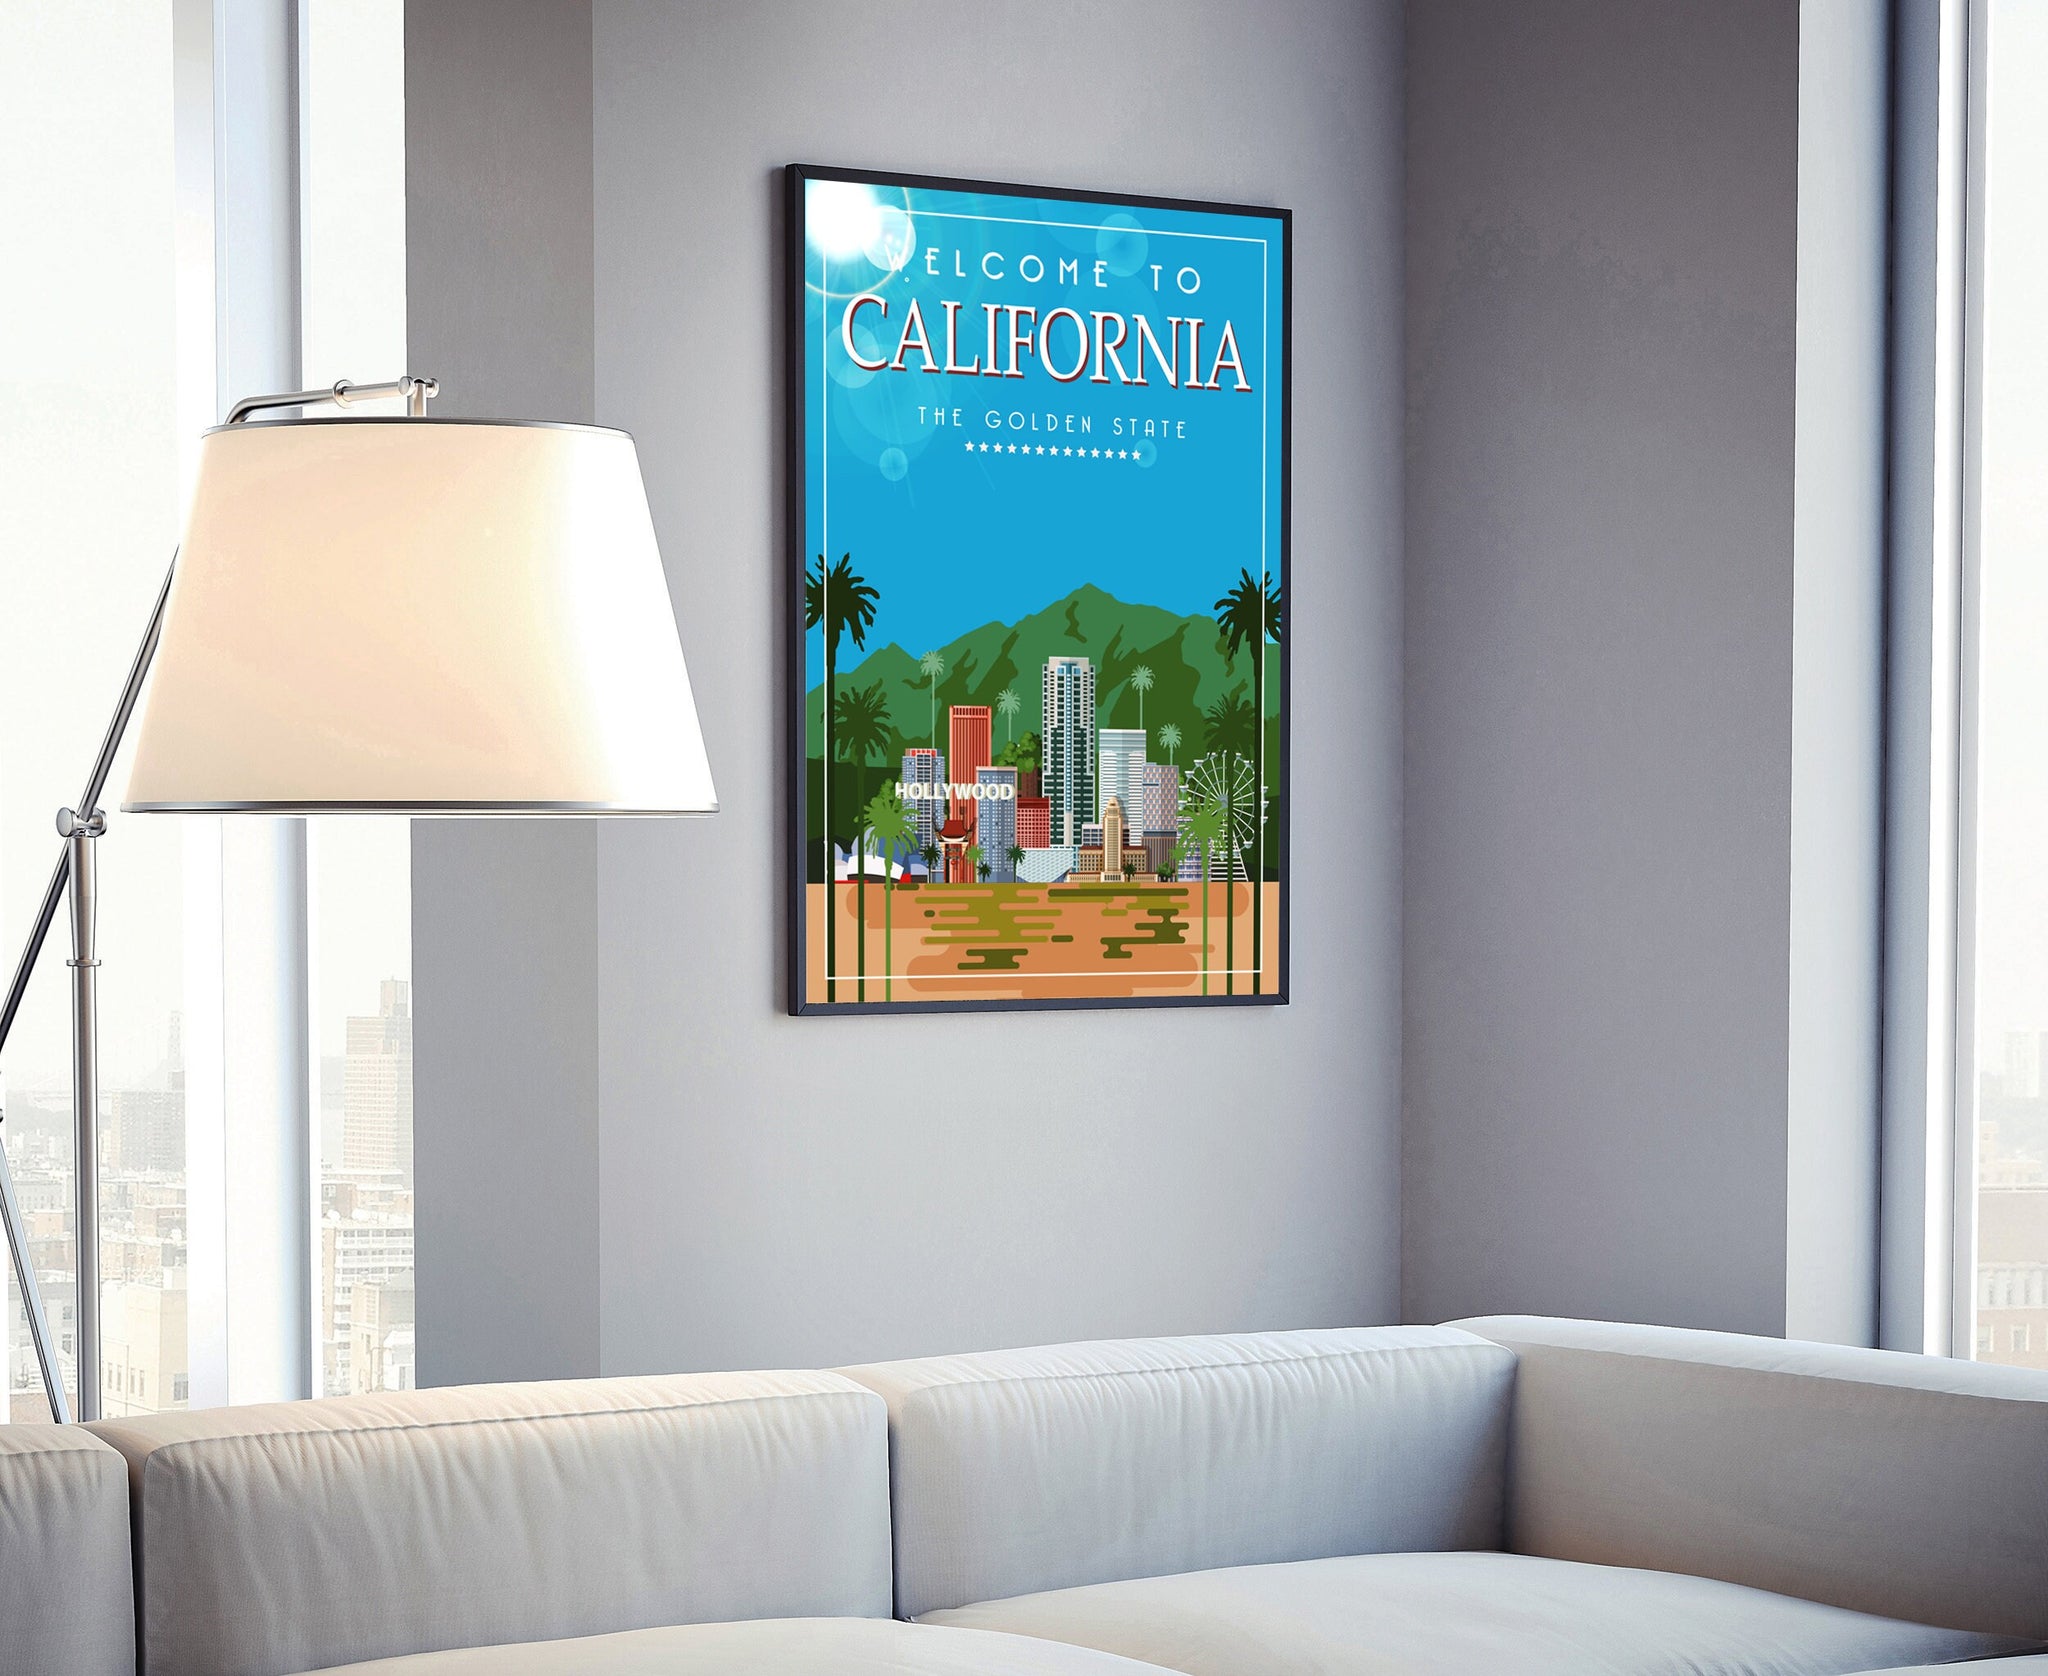 Retro Style Travel Poster, California Vintage Rustic Poster Print, Home Wall Art, Office decorations, California posters, State Map Poster